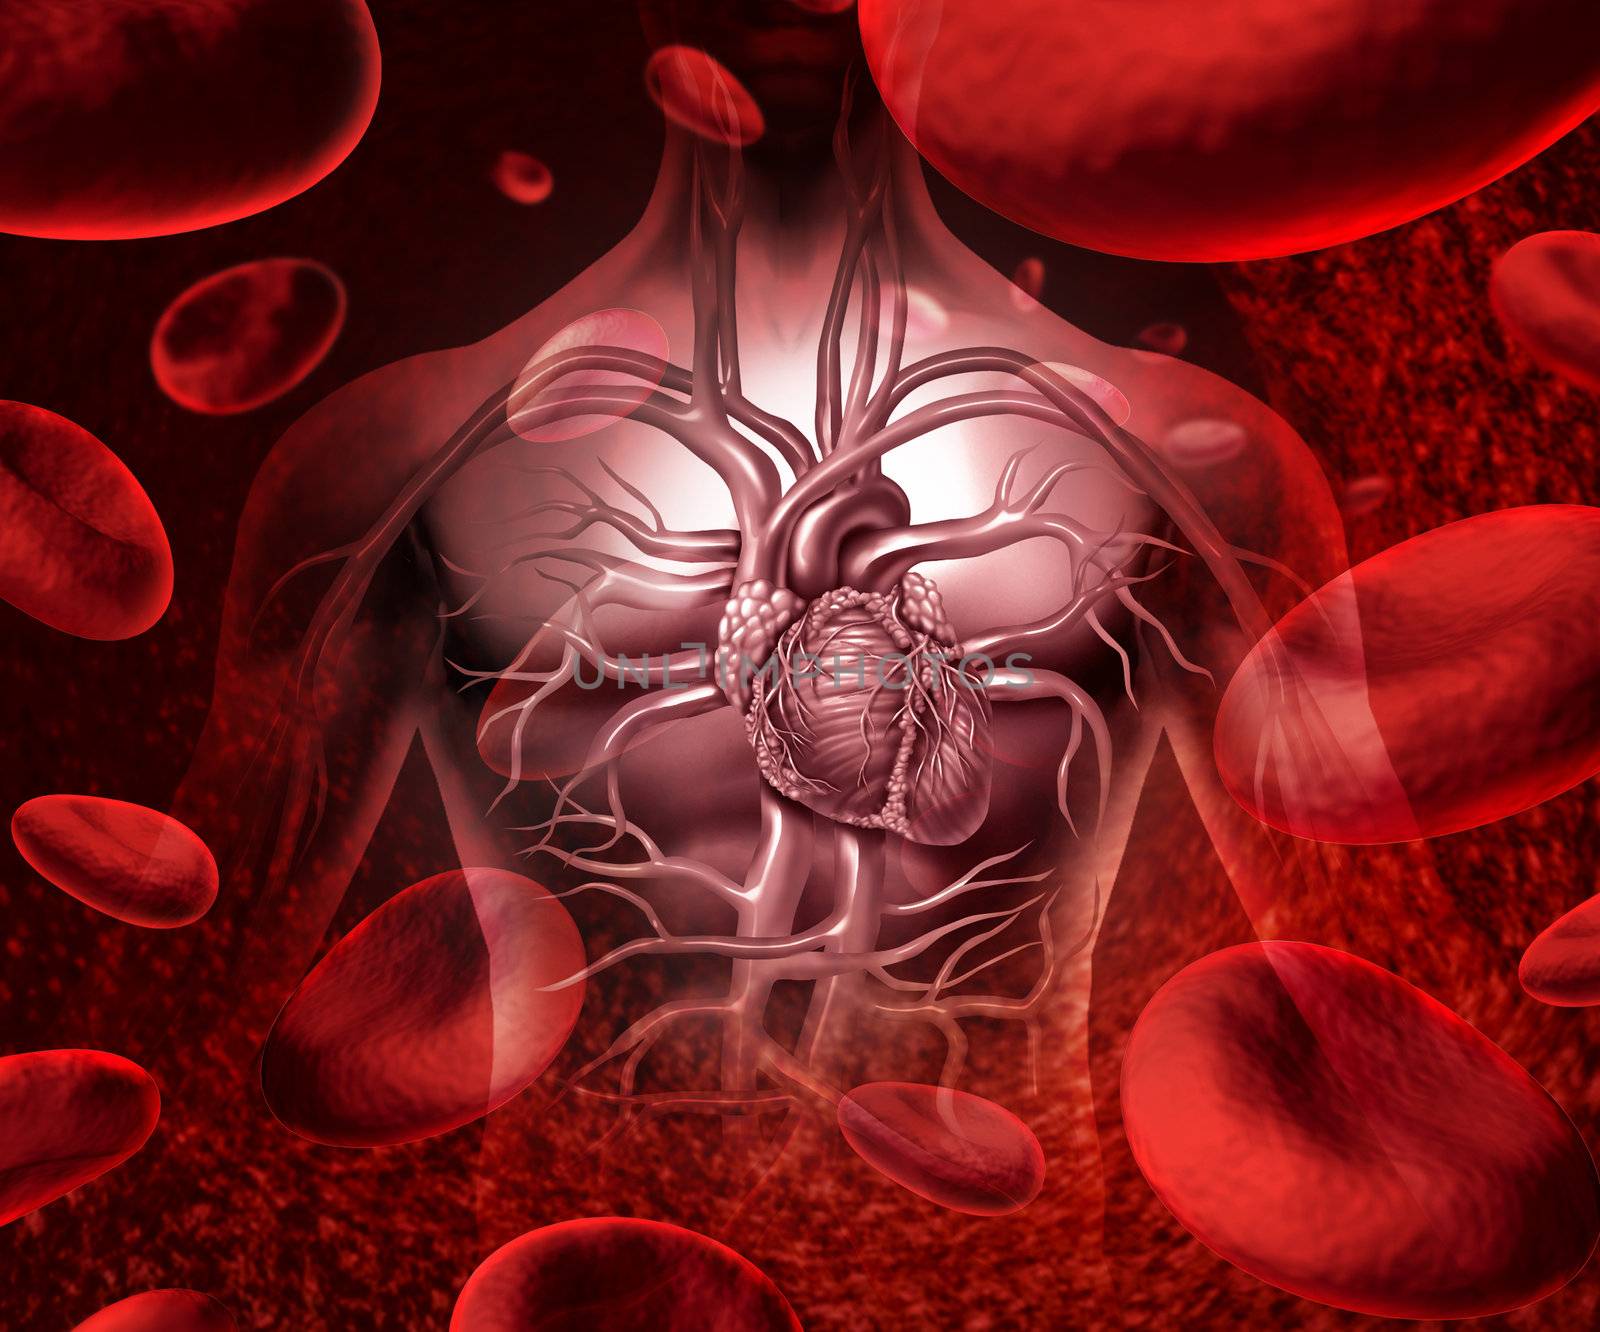 Blood system and circultaion with a human heart cardiovascular icon with anatomy from a healthy body on a background with blood cells as a medical health care symbol of an inner organ as a medical health care concept.